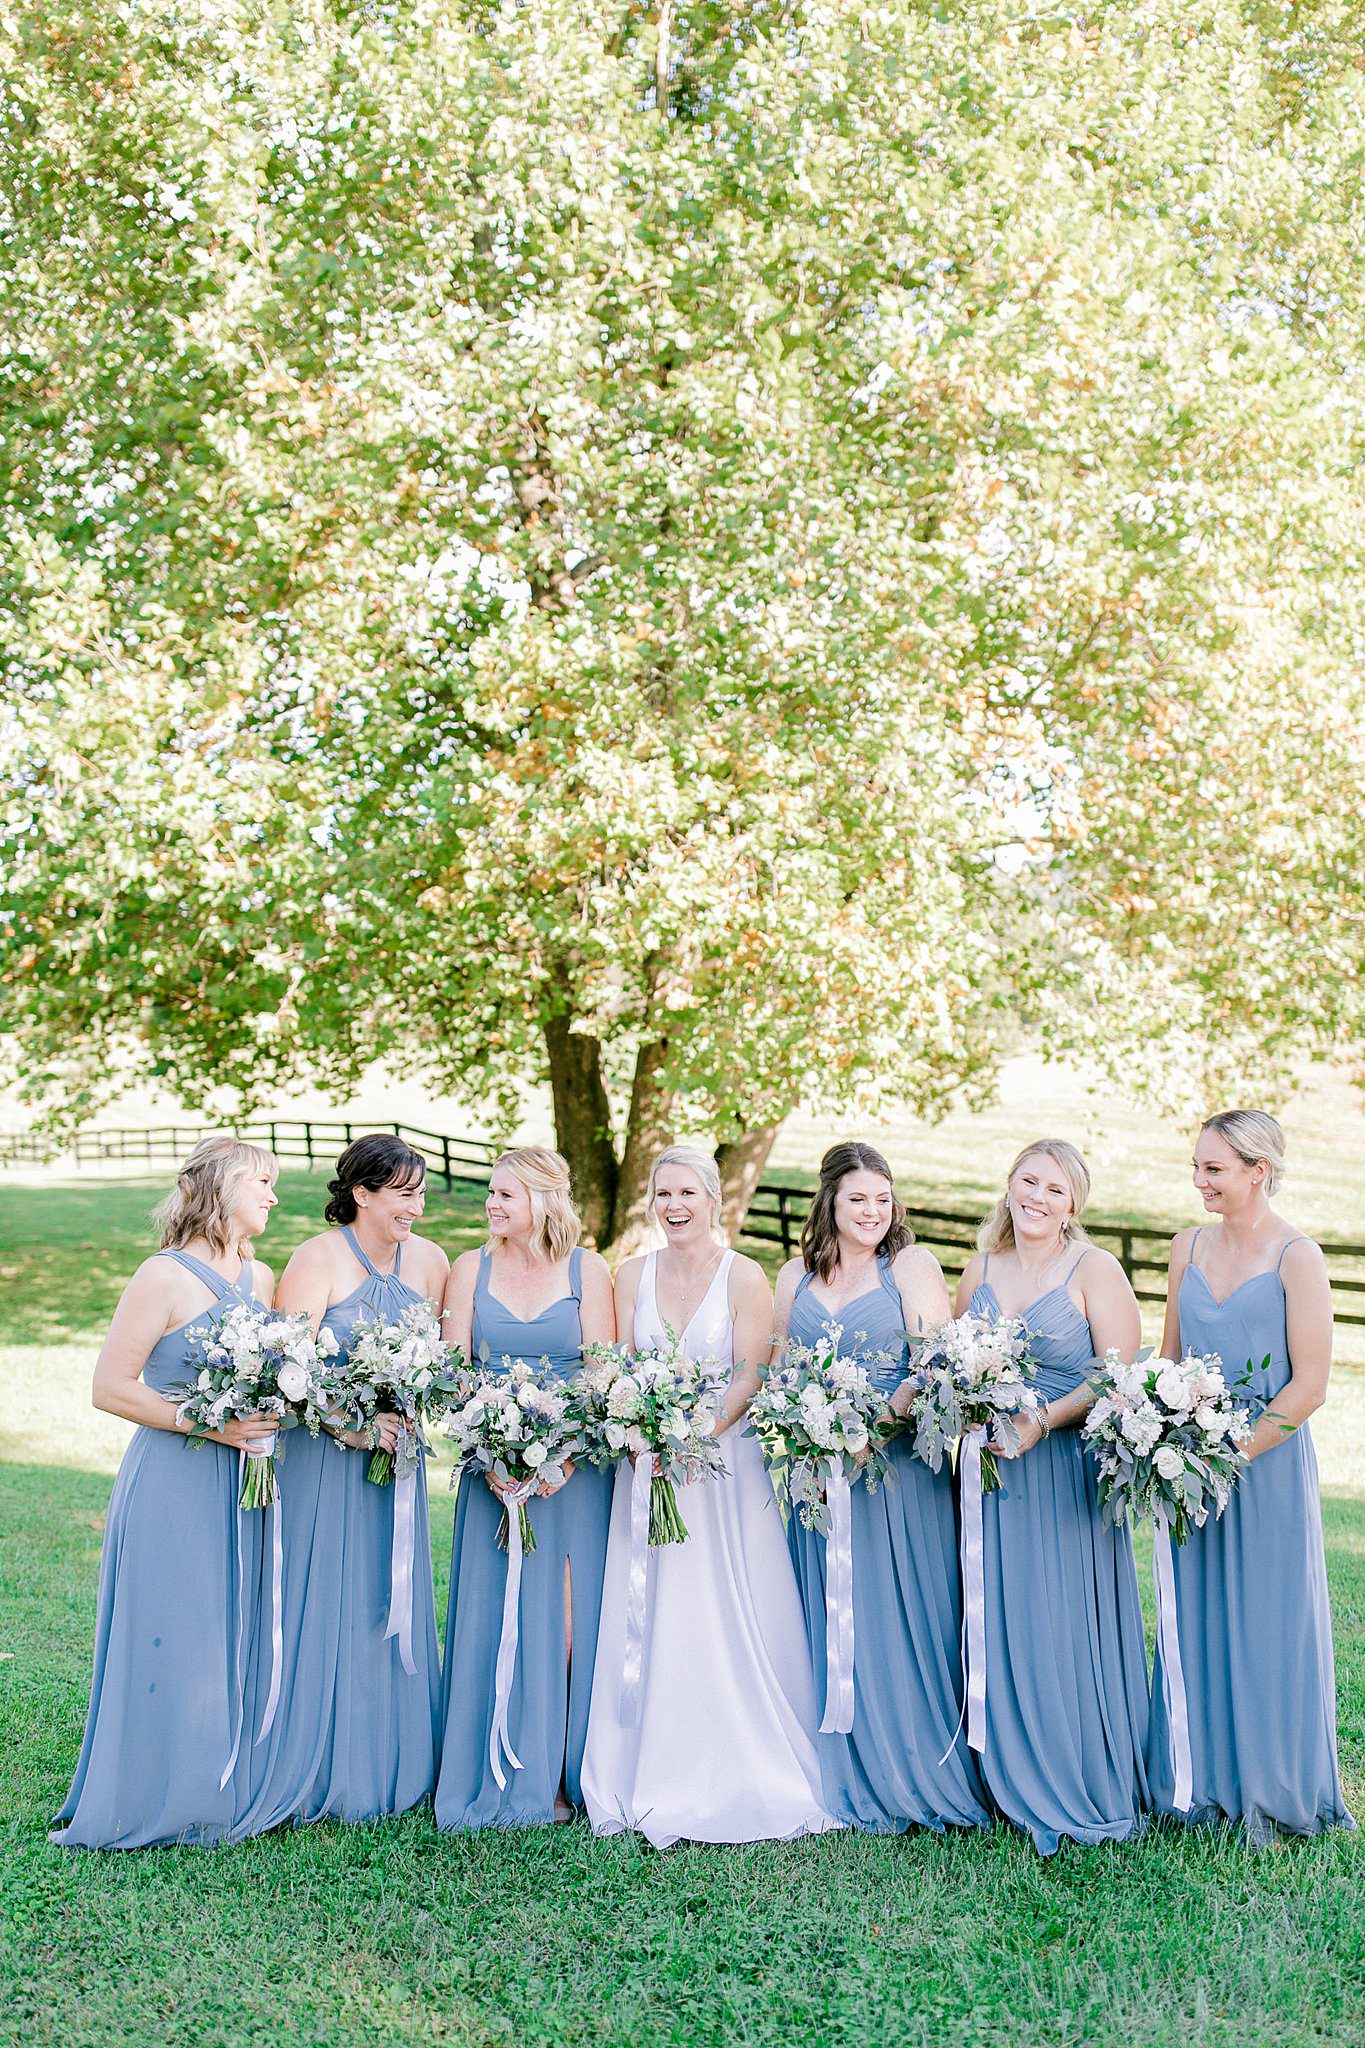 Bridesmaids in Dusty Blue Gowns